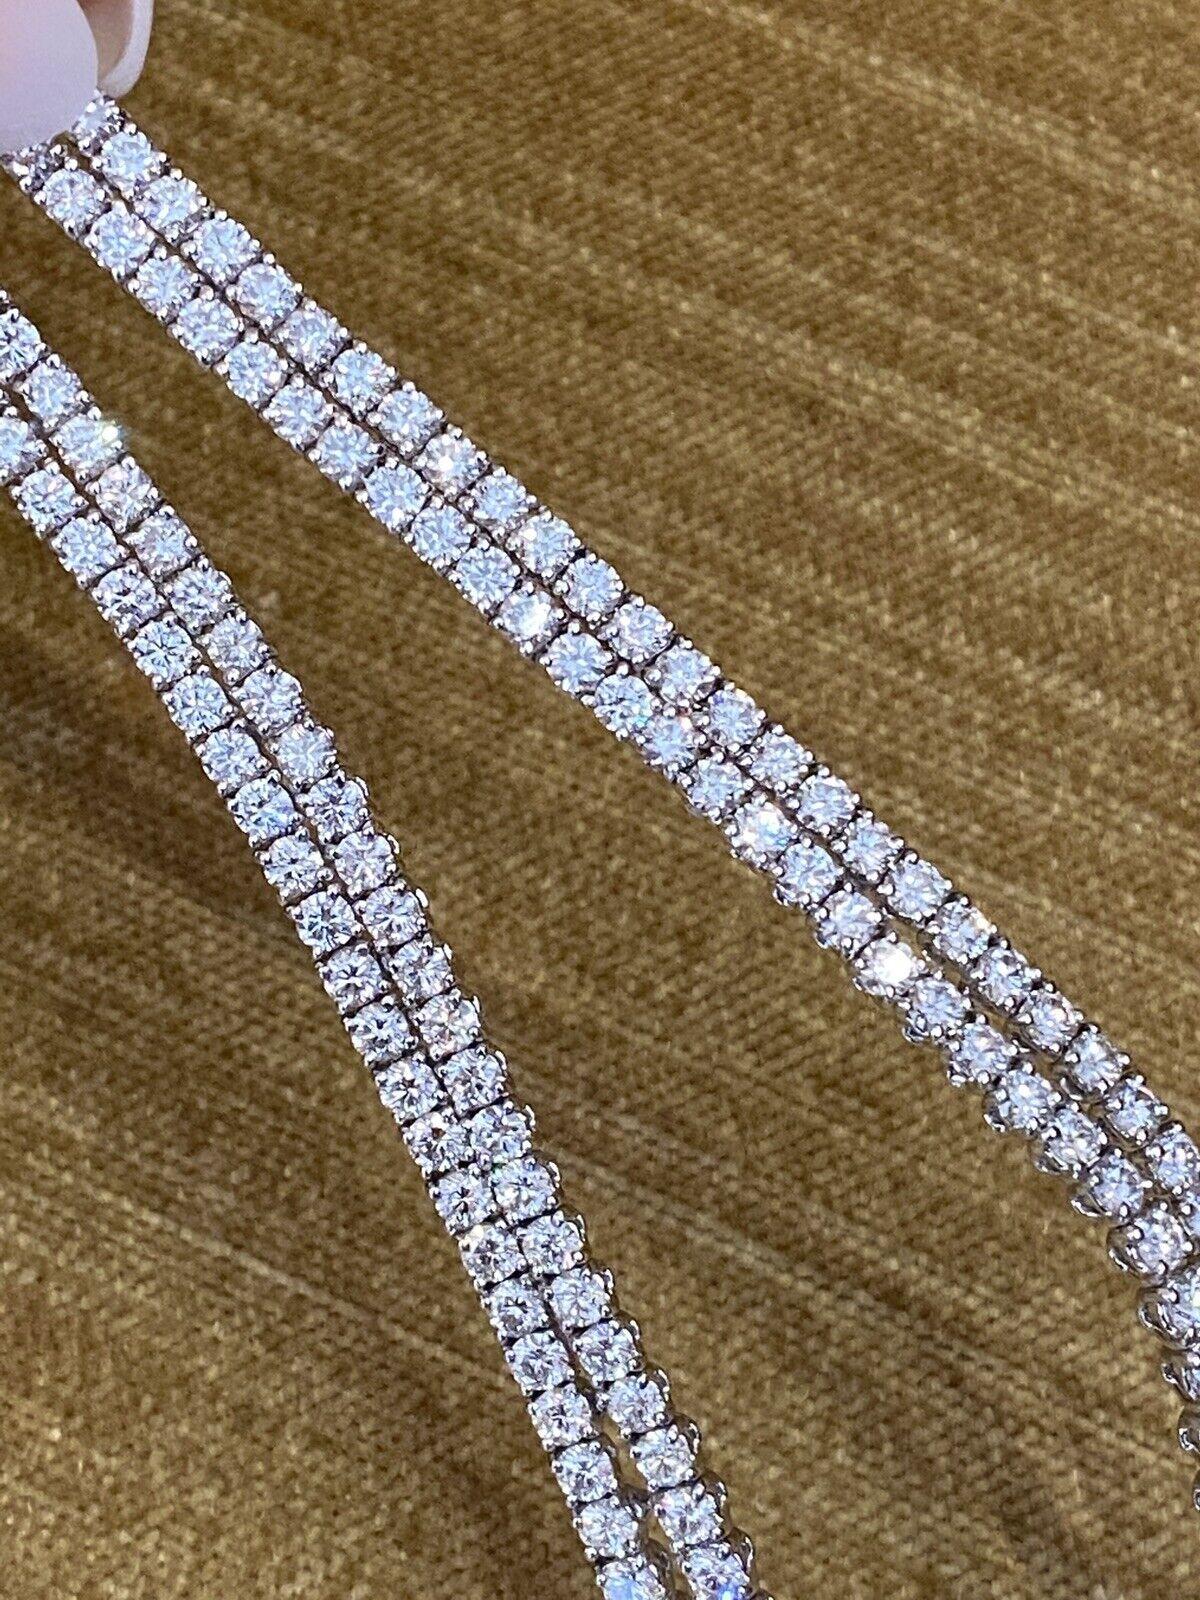 Diamond Y Necklace in 18k White Gold by STEFAN HAFNER
Features
Two rows of Round Brilliant Cut Diamonds that meet with 
a cluster of Rubies and Pink Sapphires and drop down into loops

35.02 carats in total of Diamonds

4 Pear-shaped Rubies